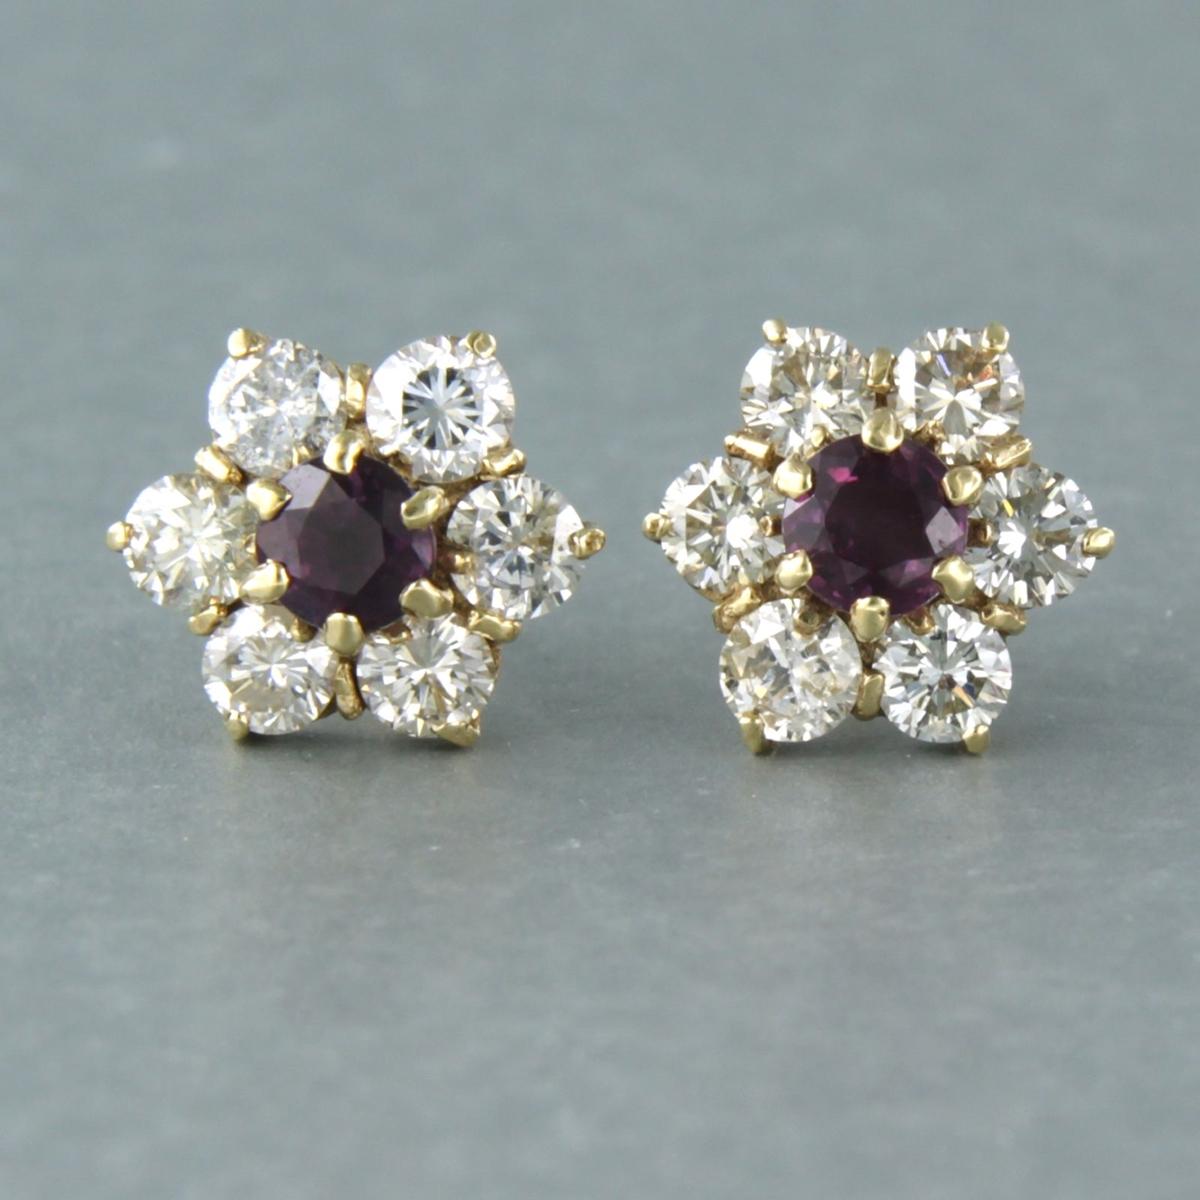 14k yellow gold earrings with garnet and brilliant cut diamond up to 0.15ct - F/G - SI

Detailed description:

the diameter of the ear stud is 1.1 cm wide

Total weight 3.5 grams

set with

- 2 x 4.0 mm round facet cut heated ruby, approximately